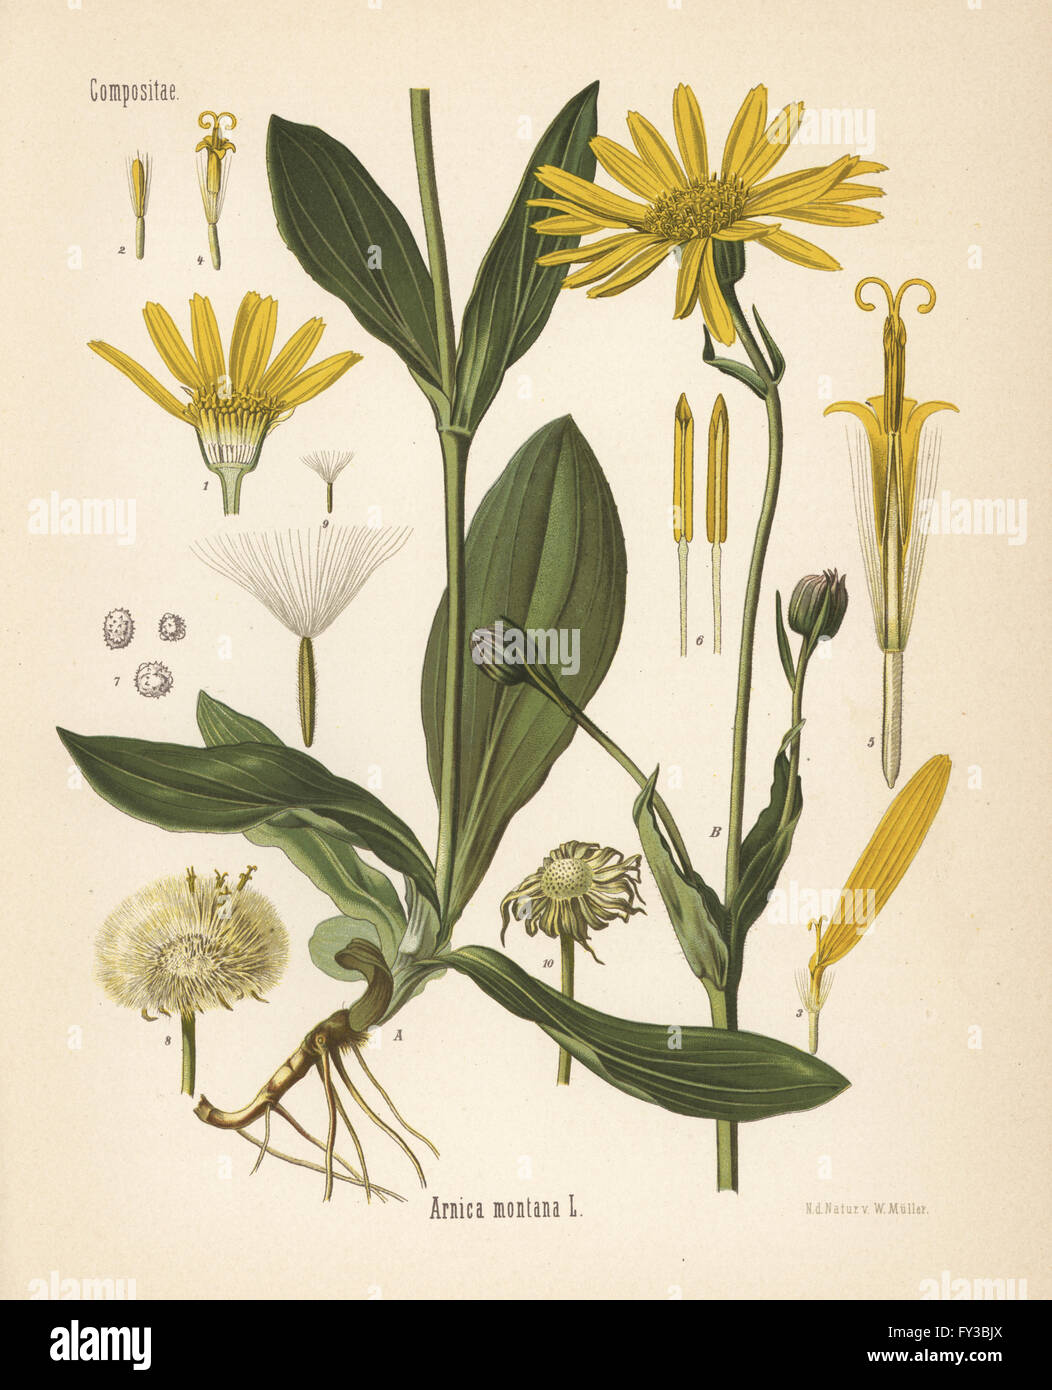 Wolf's bane or mountain arnica, Arnica montana. Chromolithograph after a botanical illustration by Walther Muller from Hermann Adolph Koehler's Medicinal Plants, edited by Gustav Pabst, Koehler, Germany, 1887. Stock Photo